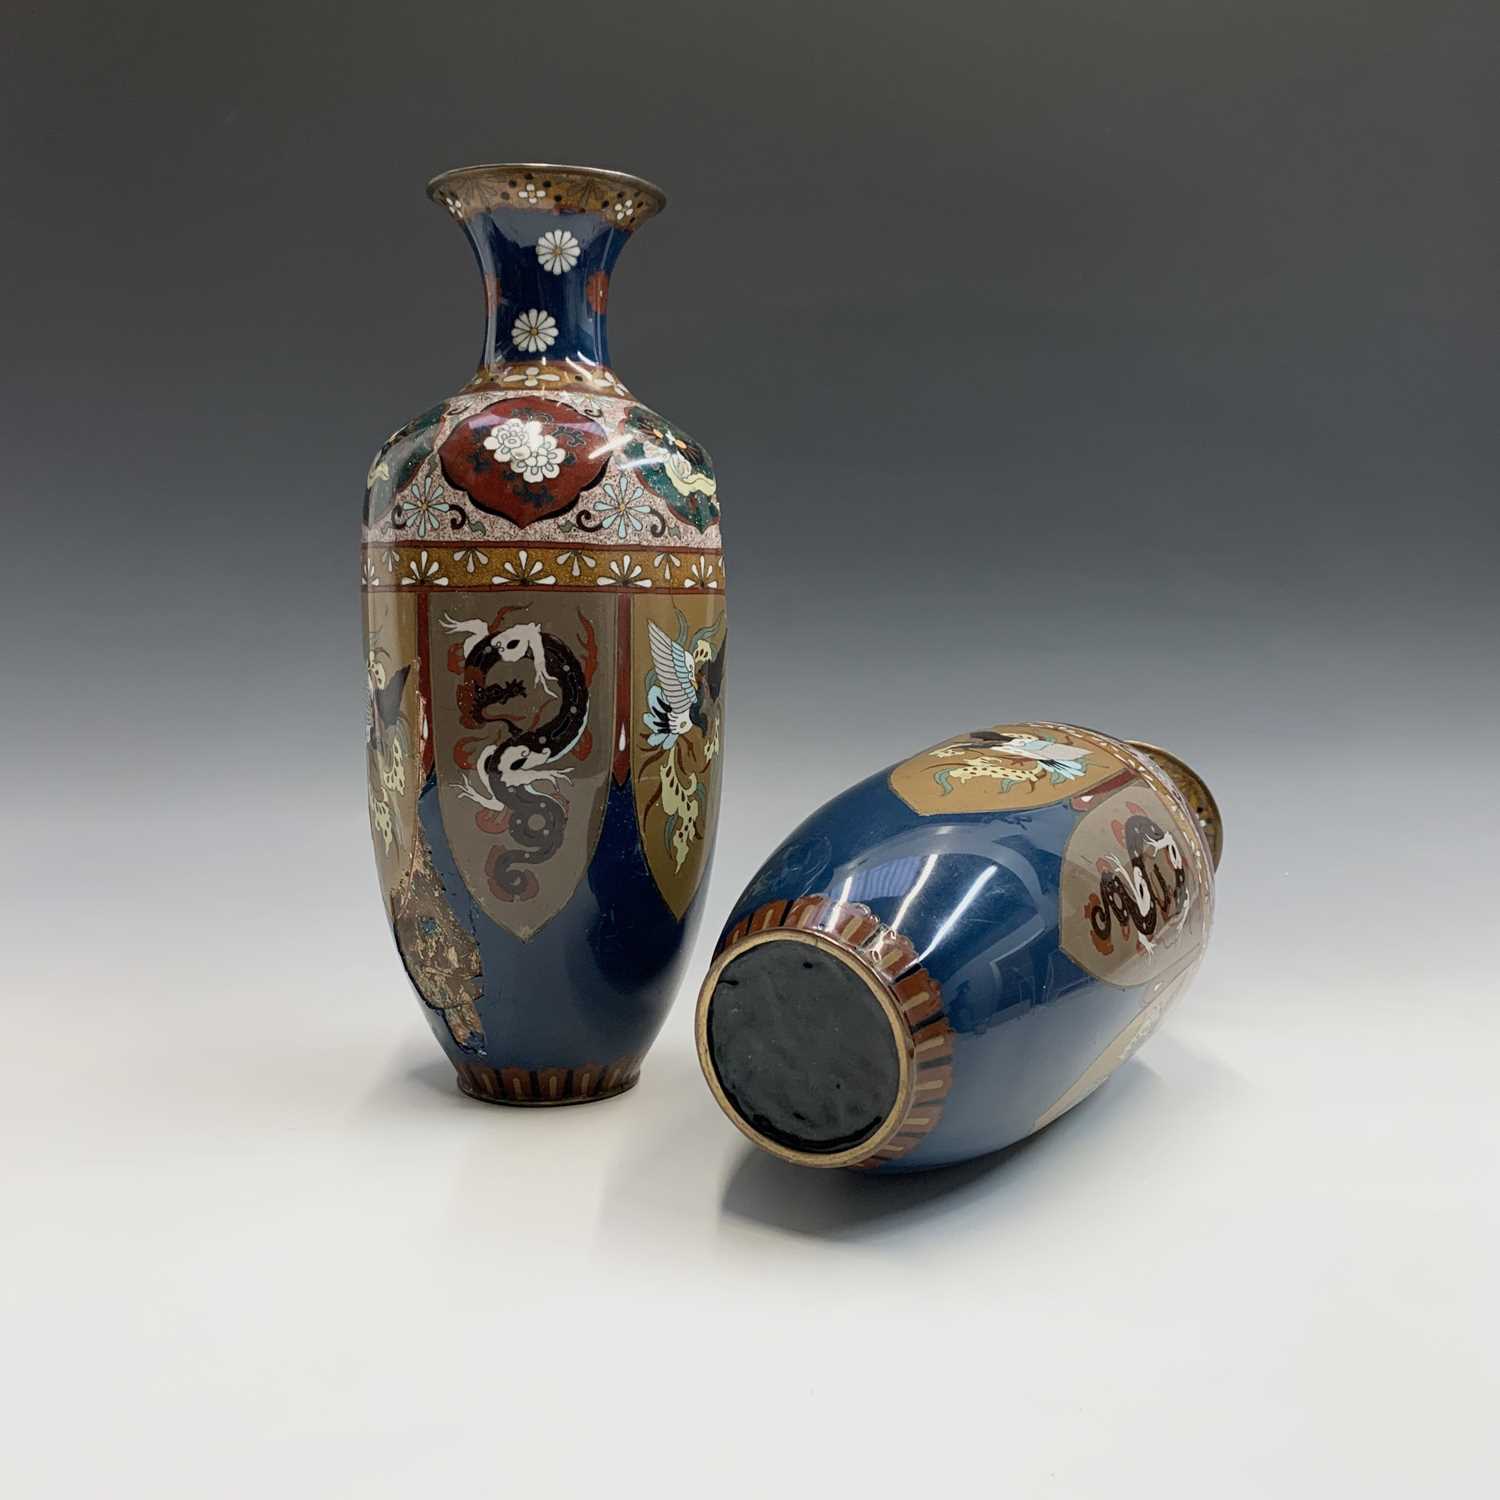 A pair of Japanese cloisonne vases, late 19th century, height 36cm. - Image 5 of 5